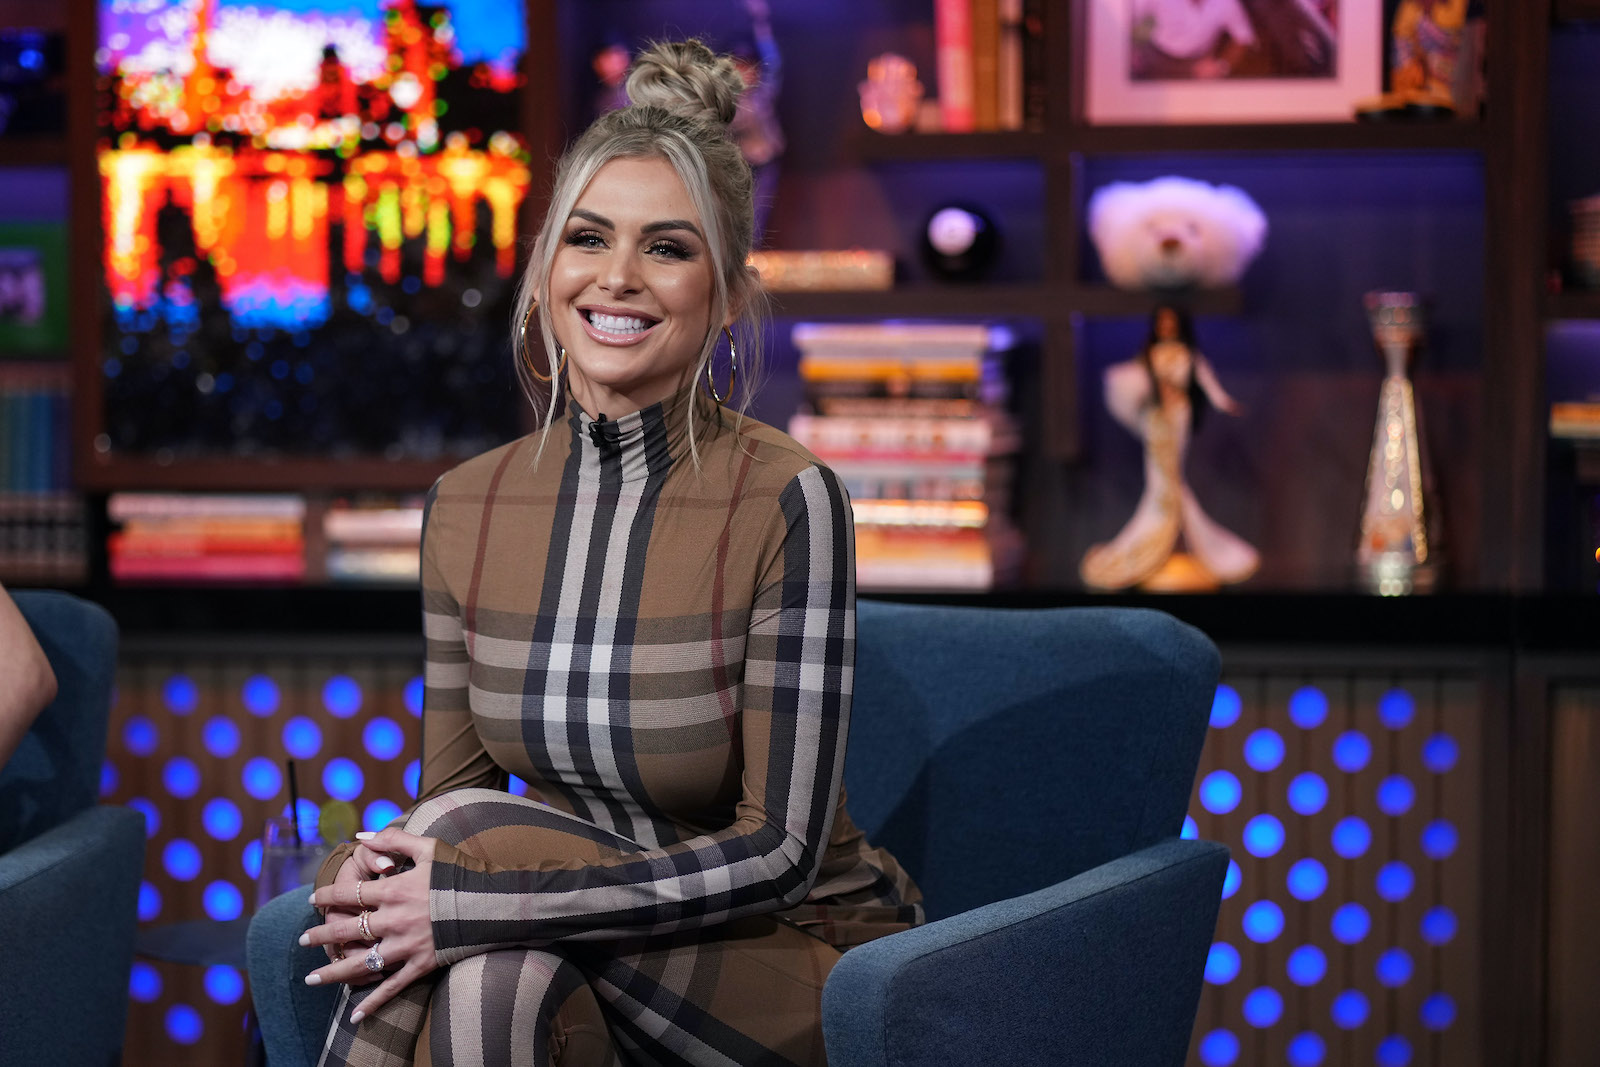 Lala Kent from 'Vanderpump Rules' smiles while sitting in a chair at 'WWHL'